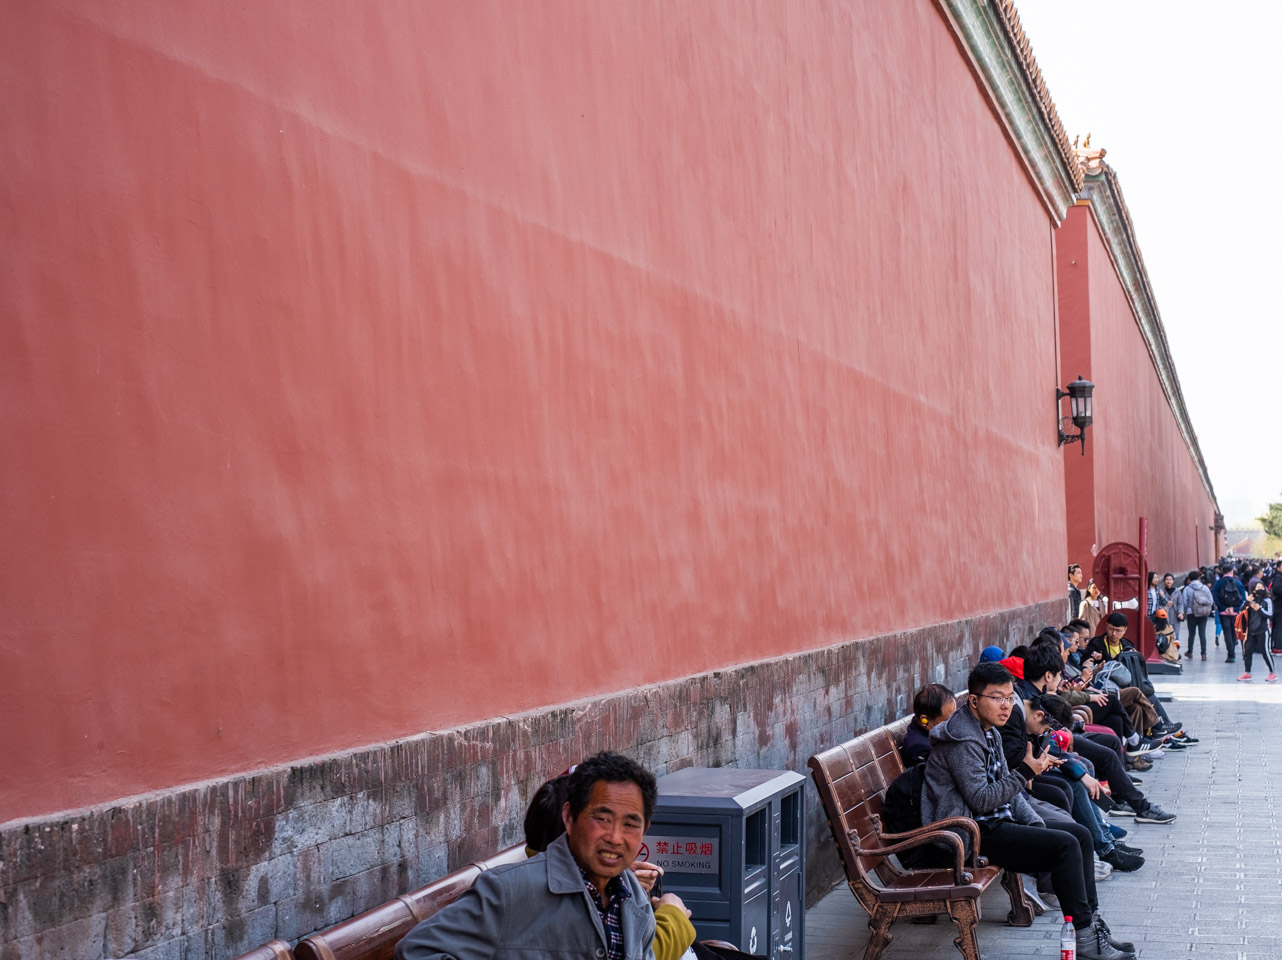 The exterior wall of the Forbidden City